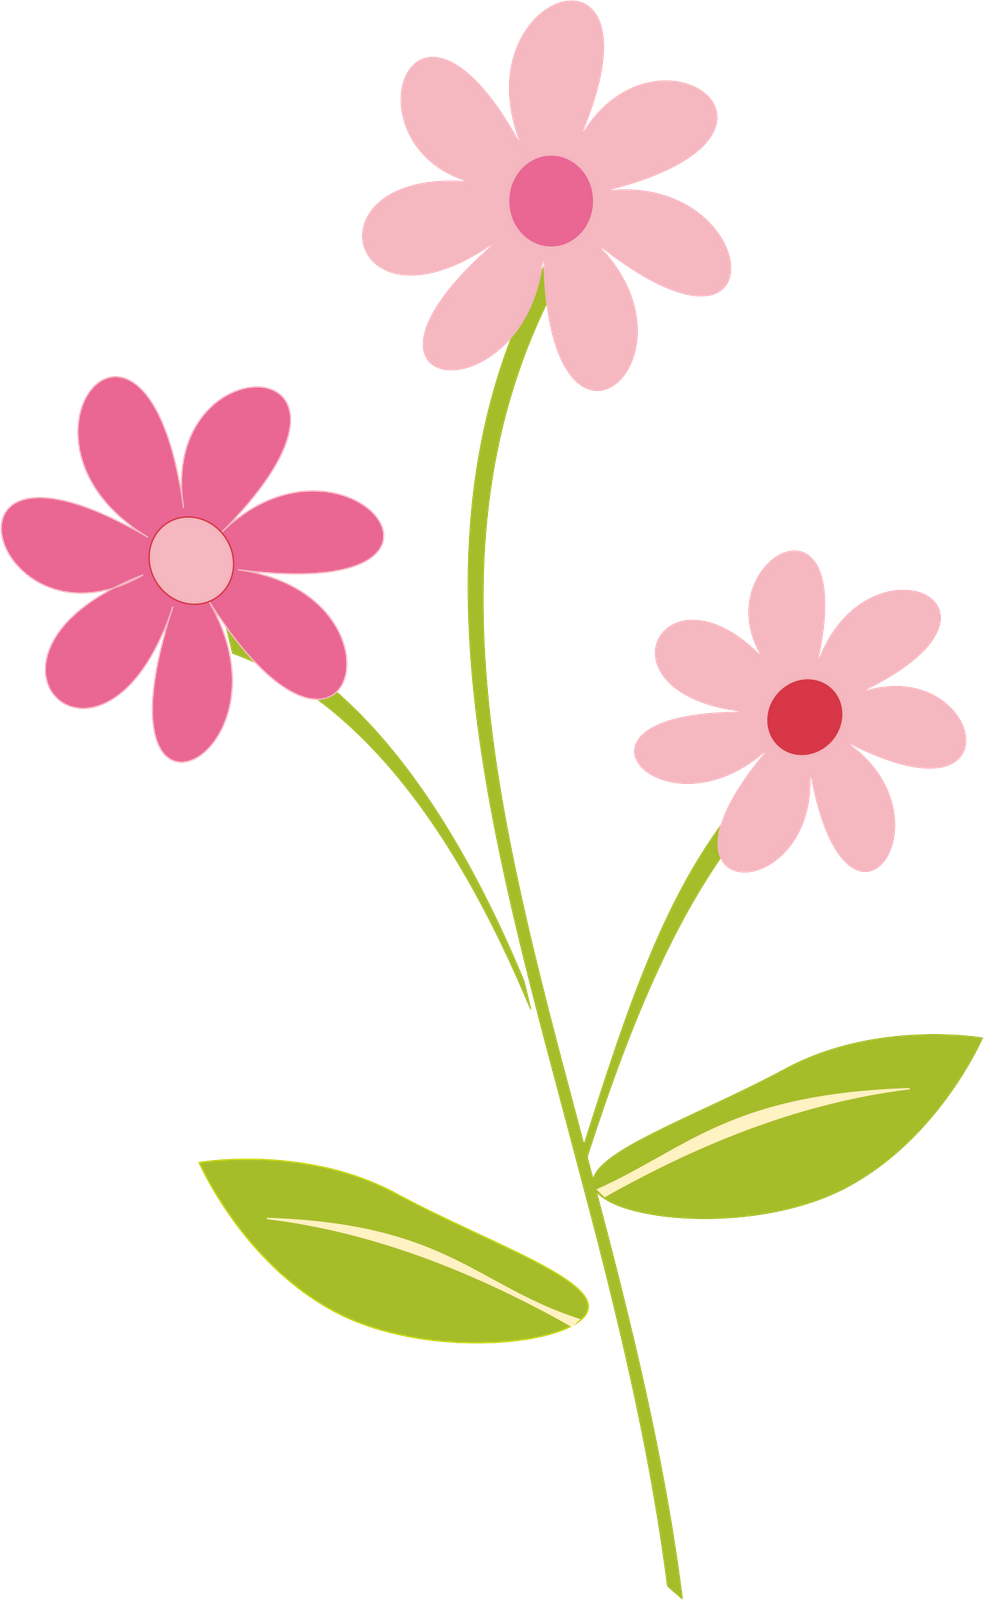 Flower clipart images png